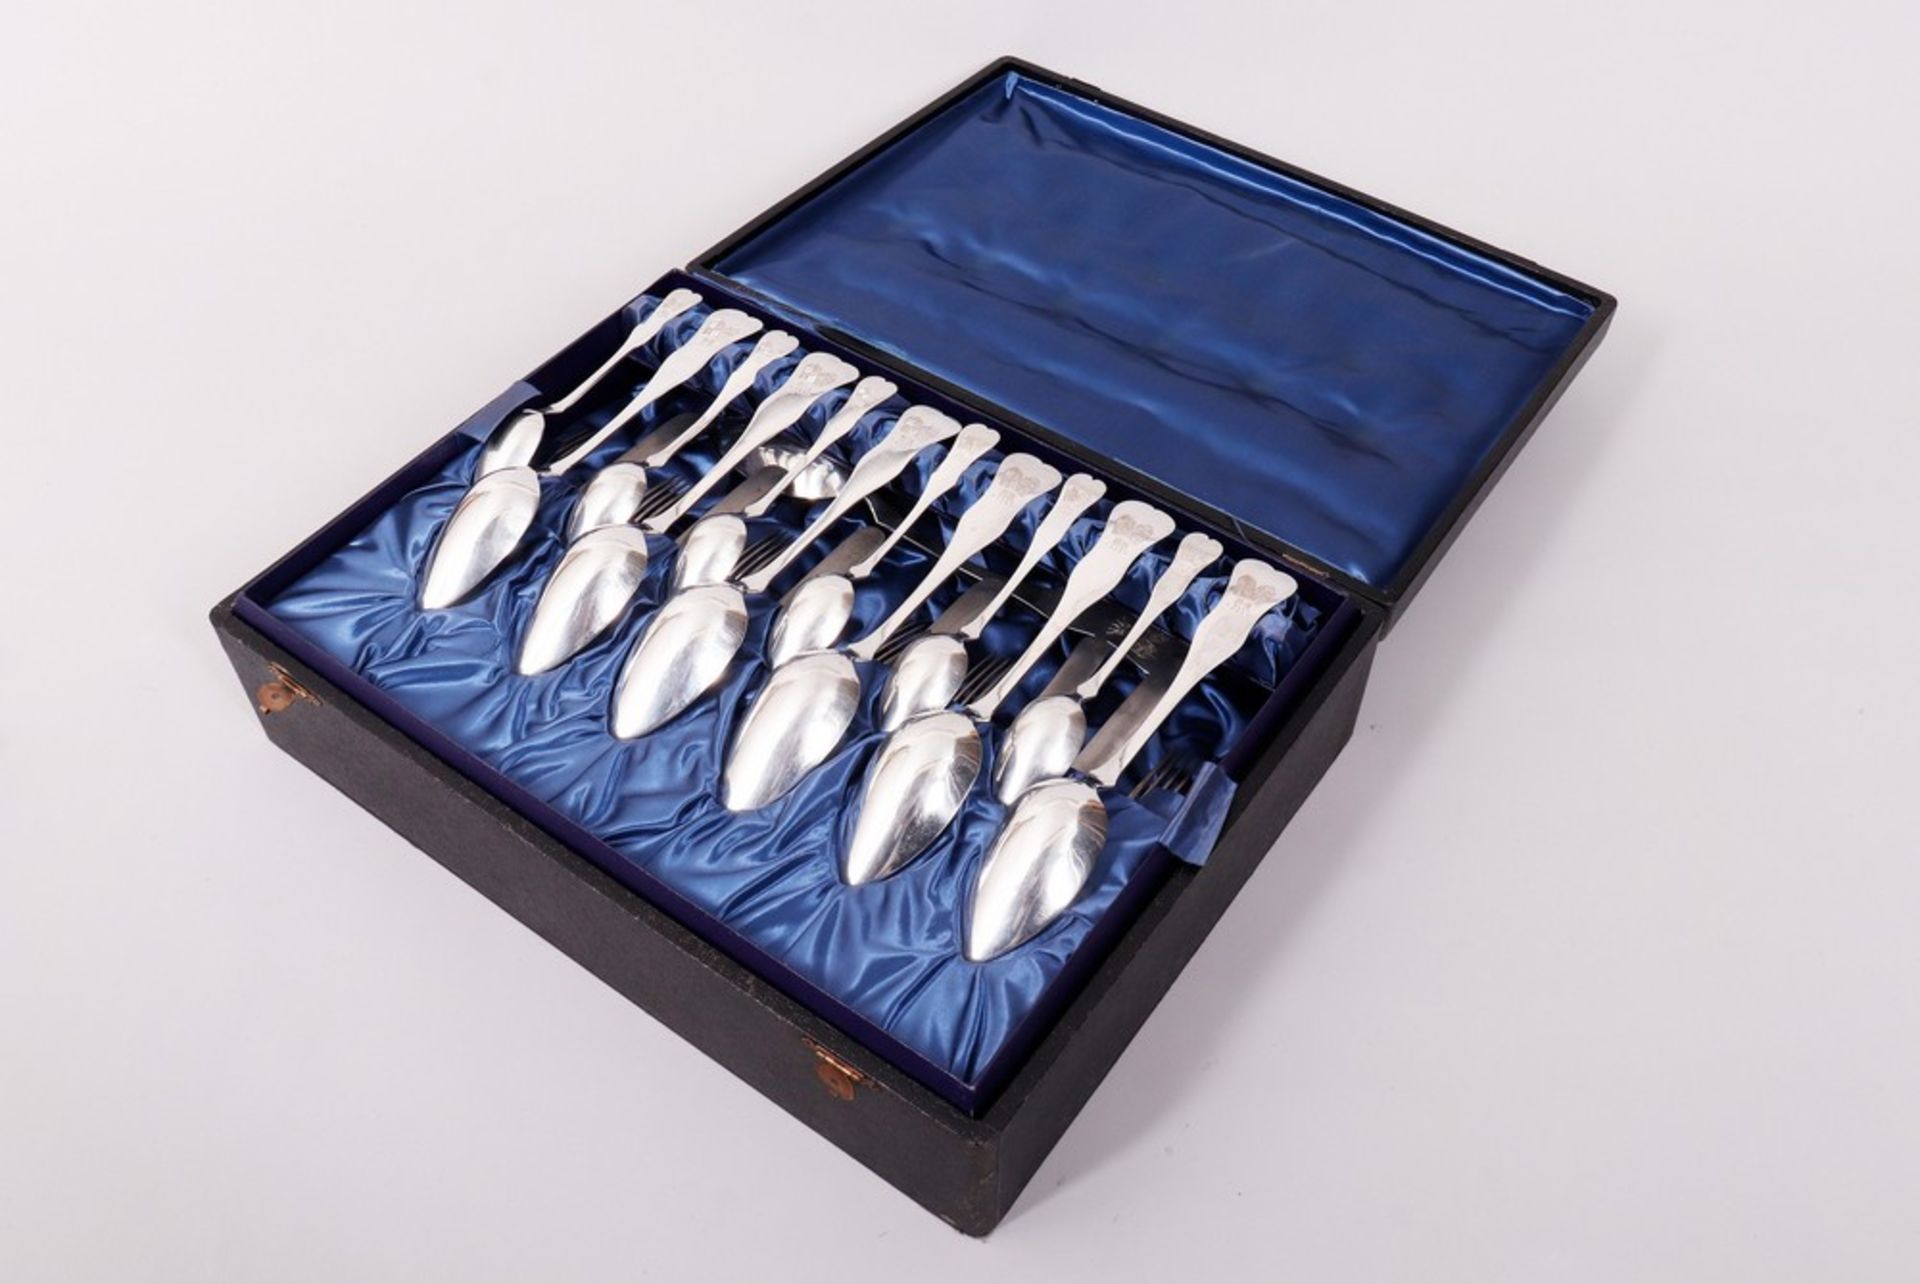 Travel cutlery for 6 people in a suitcase, 800 silver, Austria-Hungary, 19th/early 20th C. - Image 7 of 7